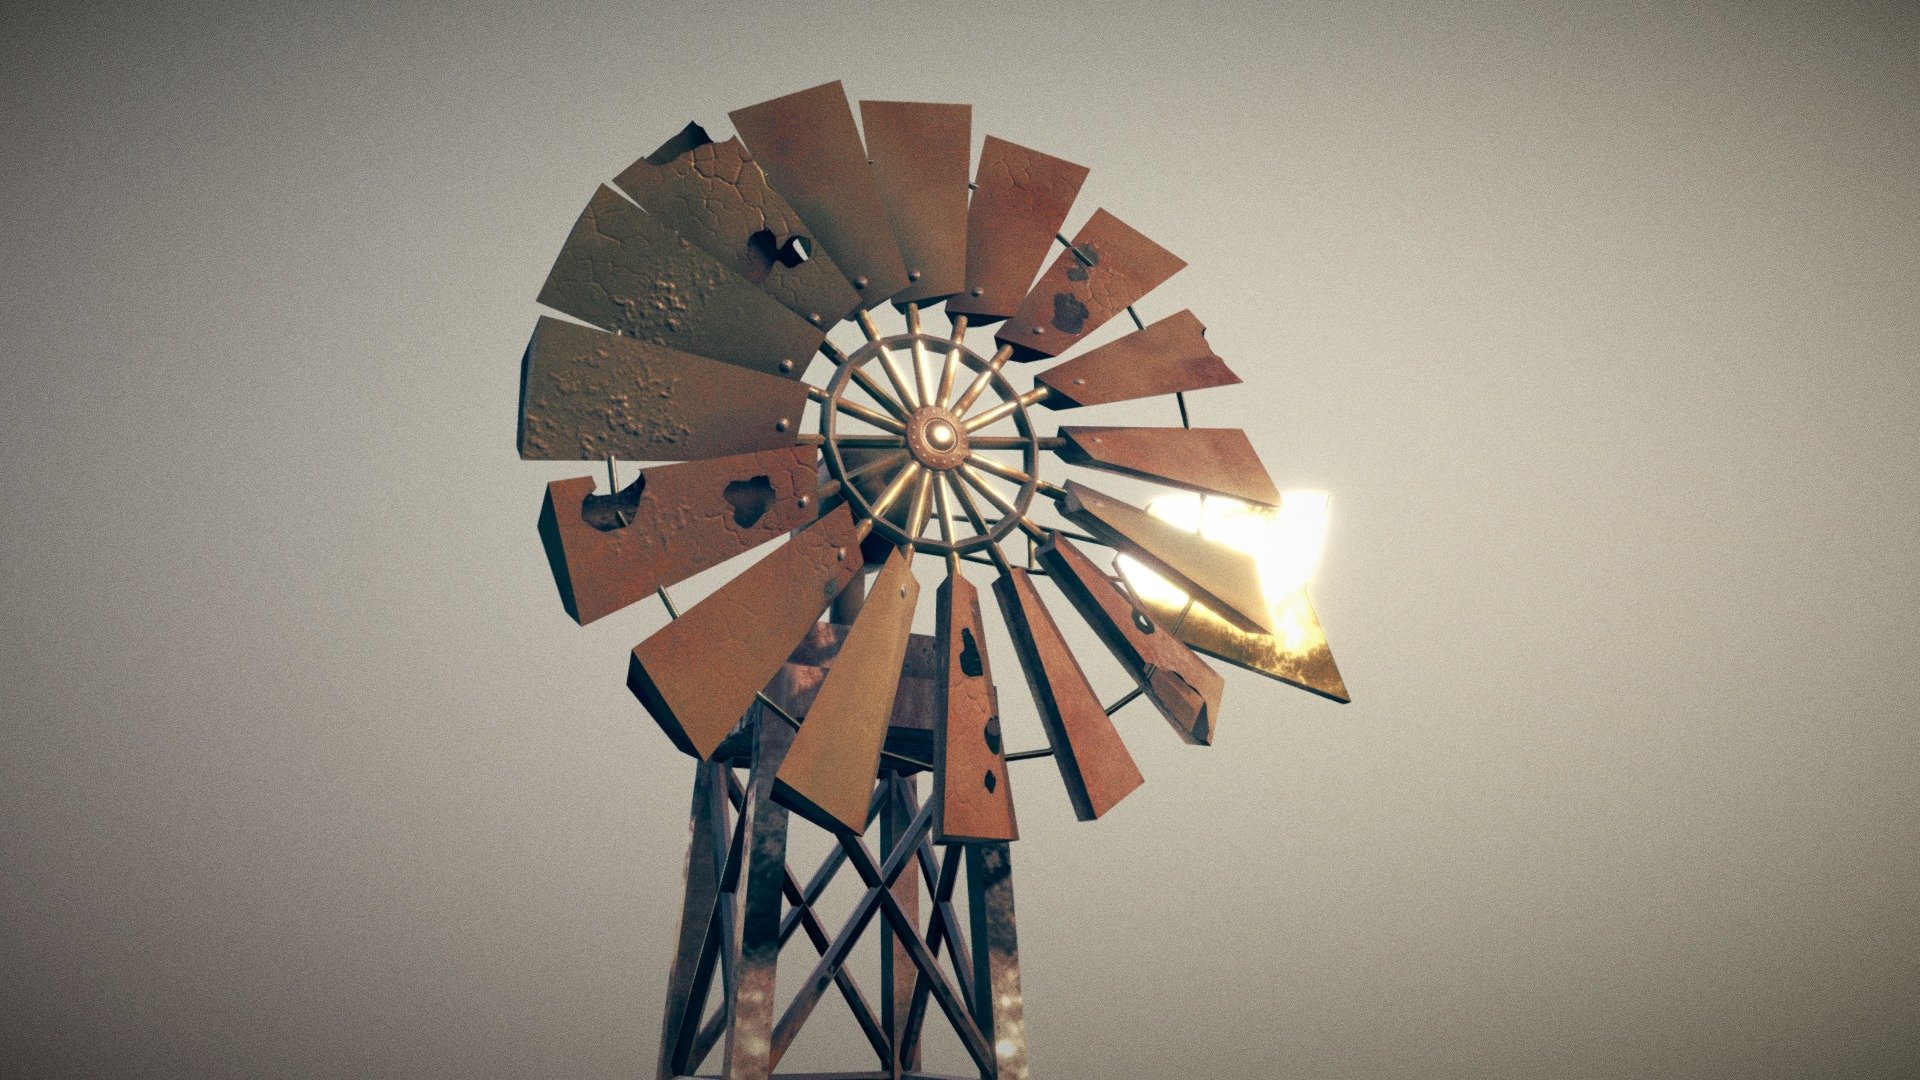 An old windmill that would be found outside of an abandoned farm in the mid-west. It's rusted with character, and can still catch the wind on its own. This model was generated and UV mapped procedurally in Houdini 3d model